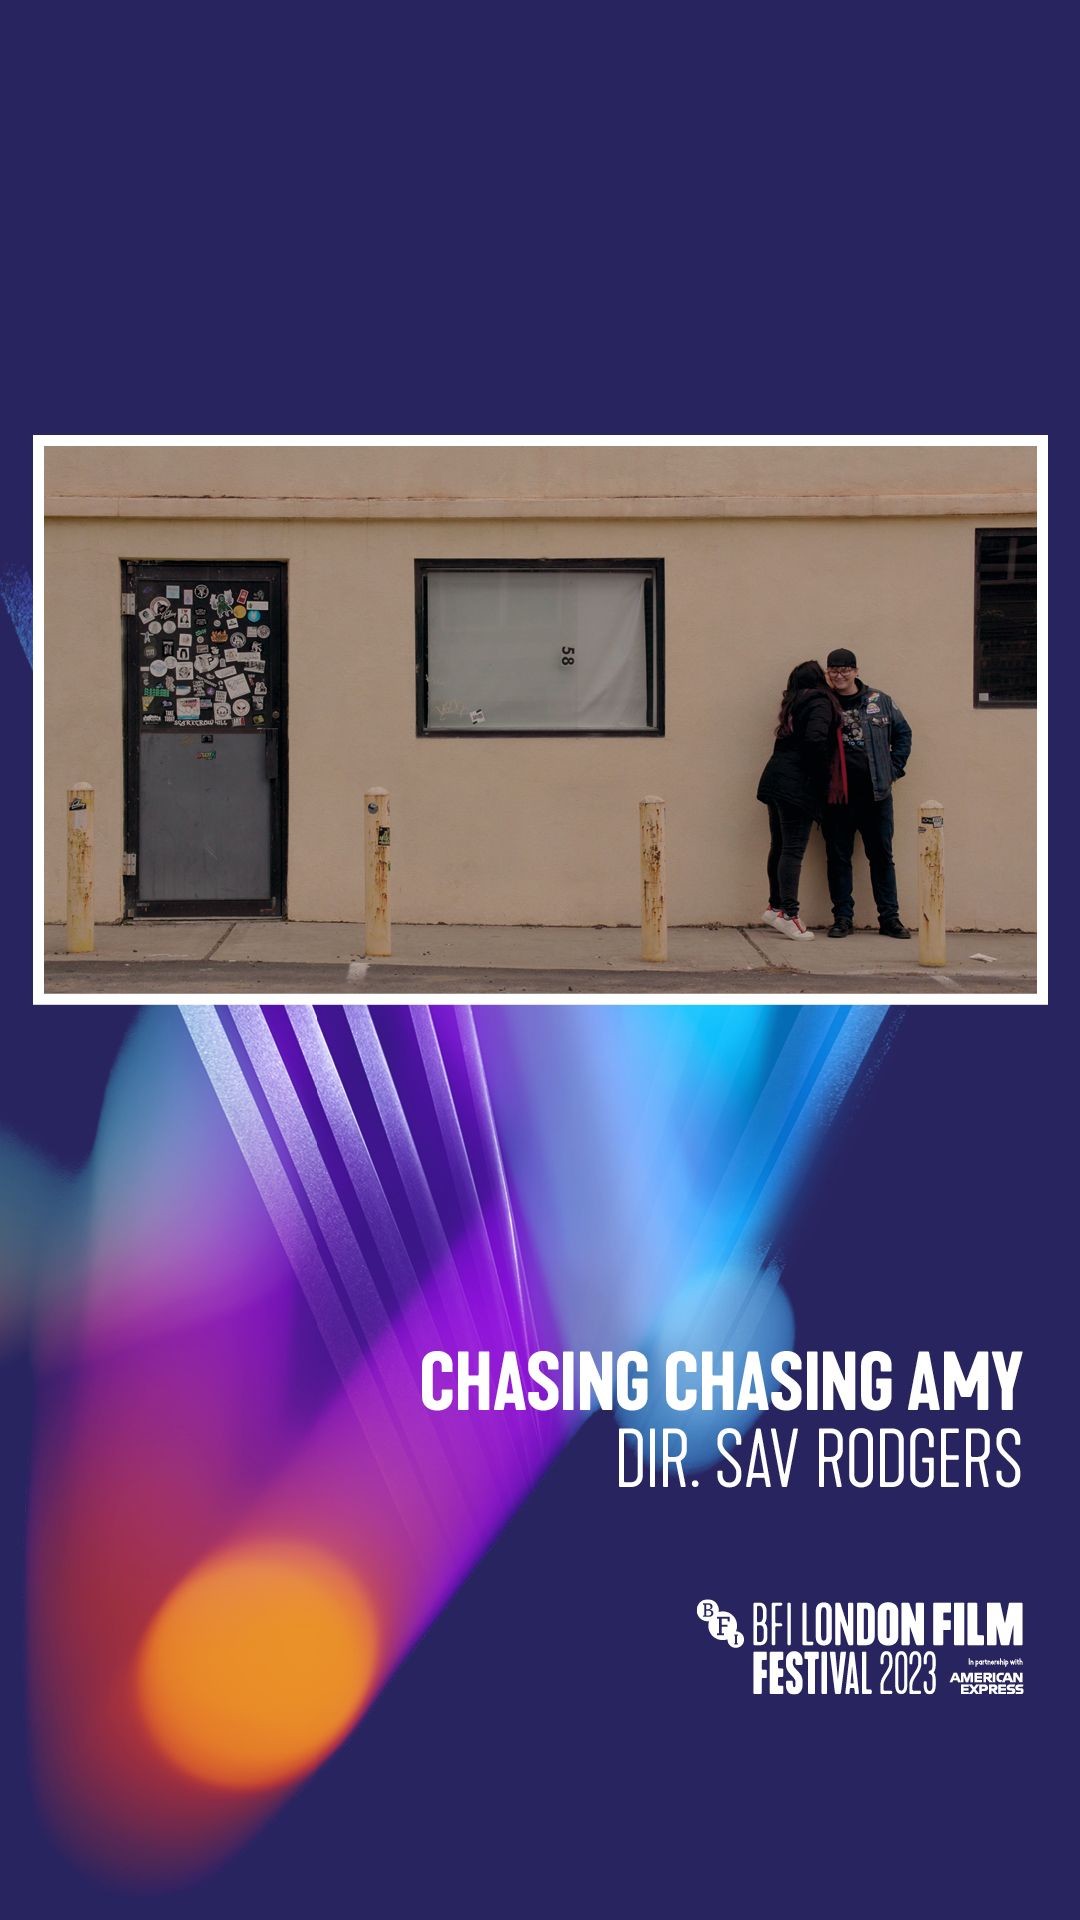 CHASING CHASING AMY